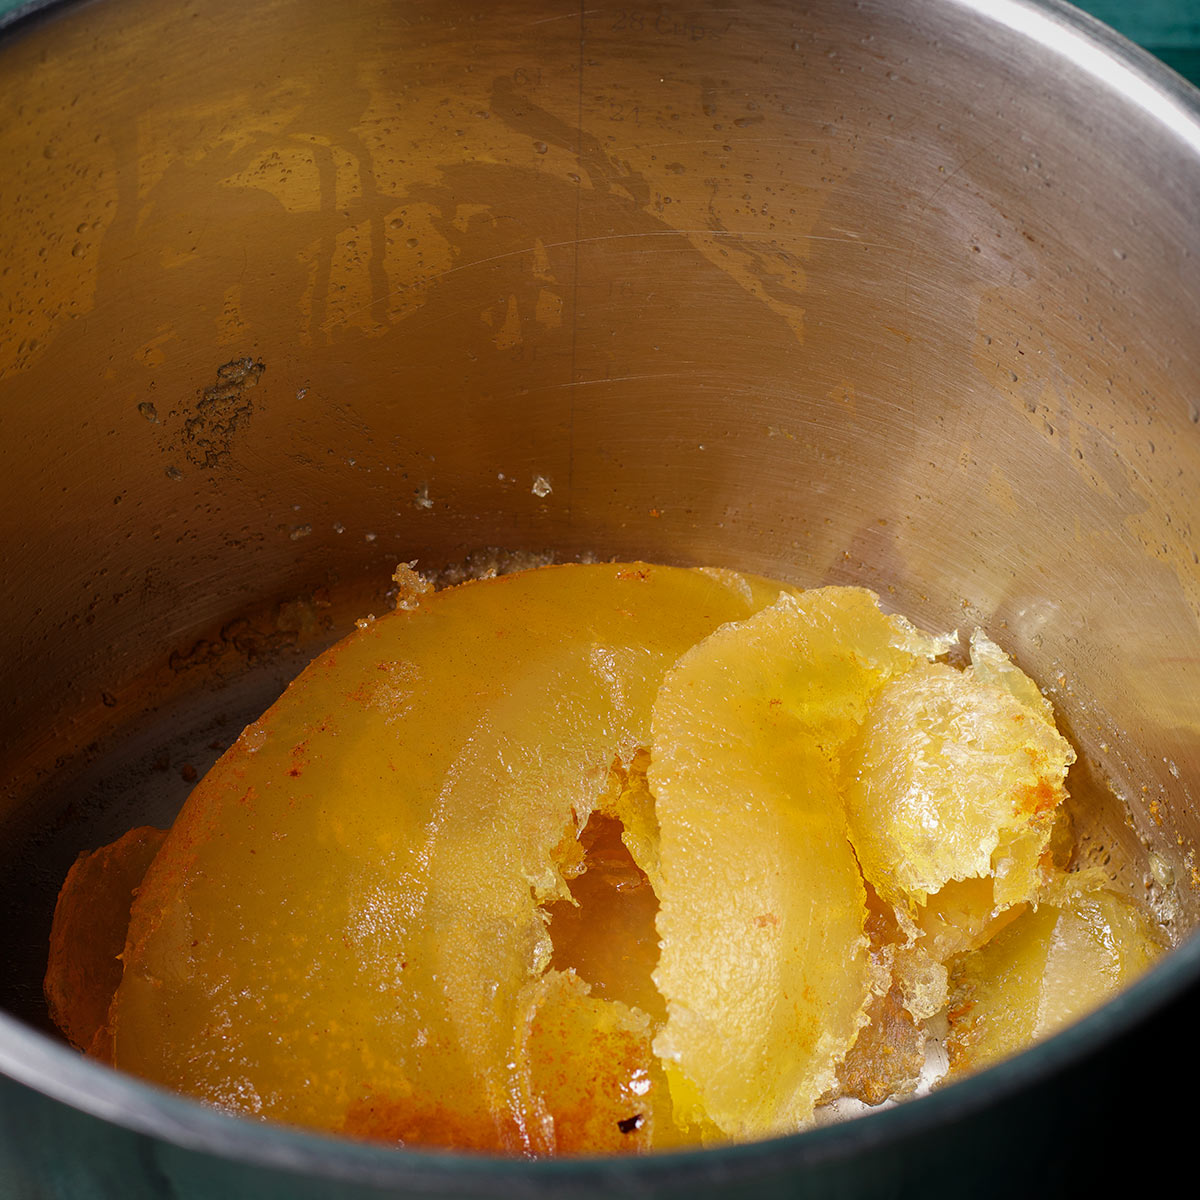 A stock pot containing used frying oil that has been turned to solid waste with a product called Fry Away.